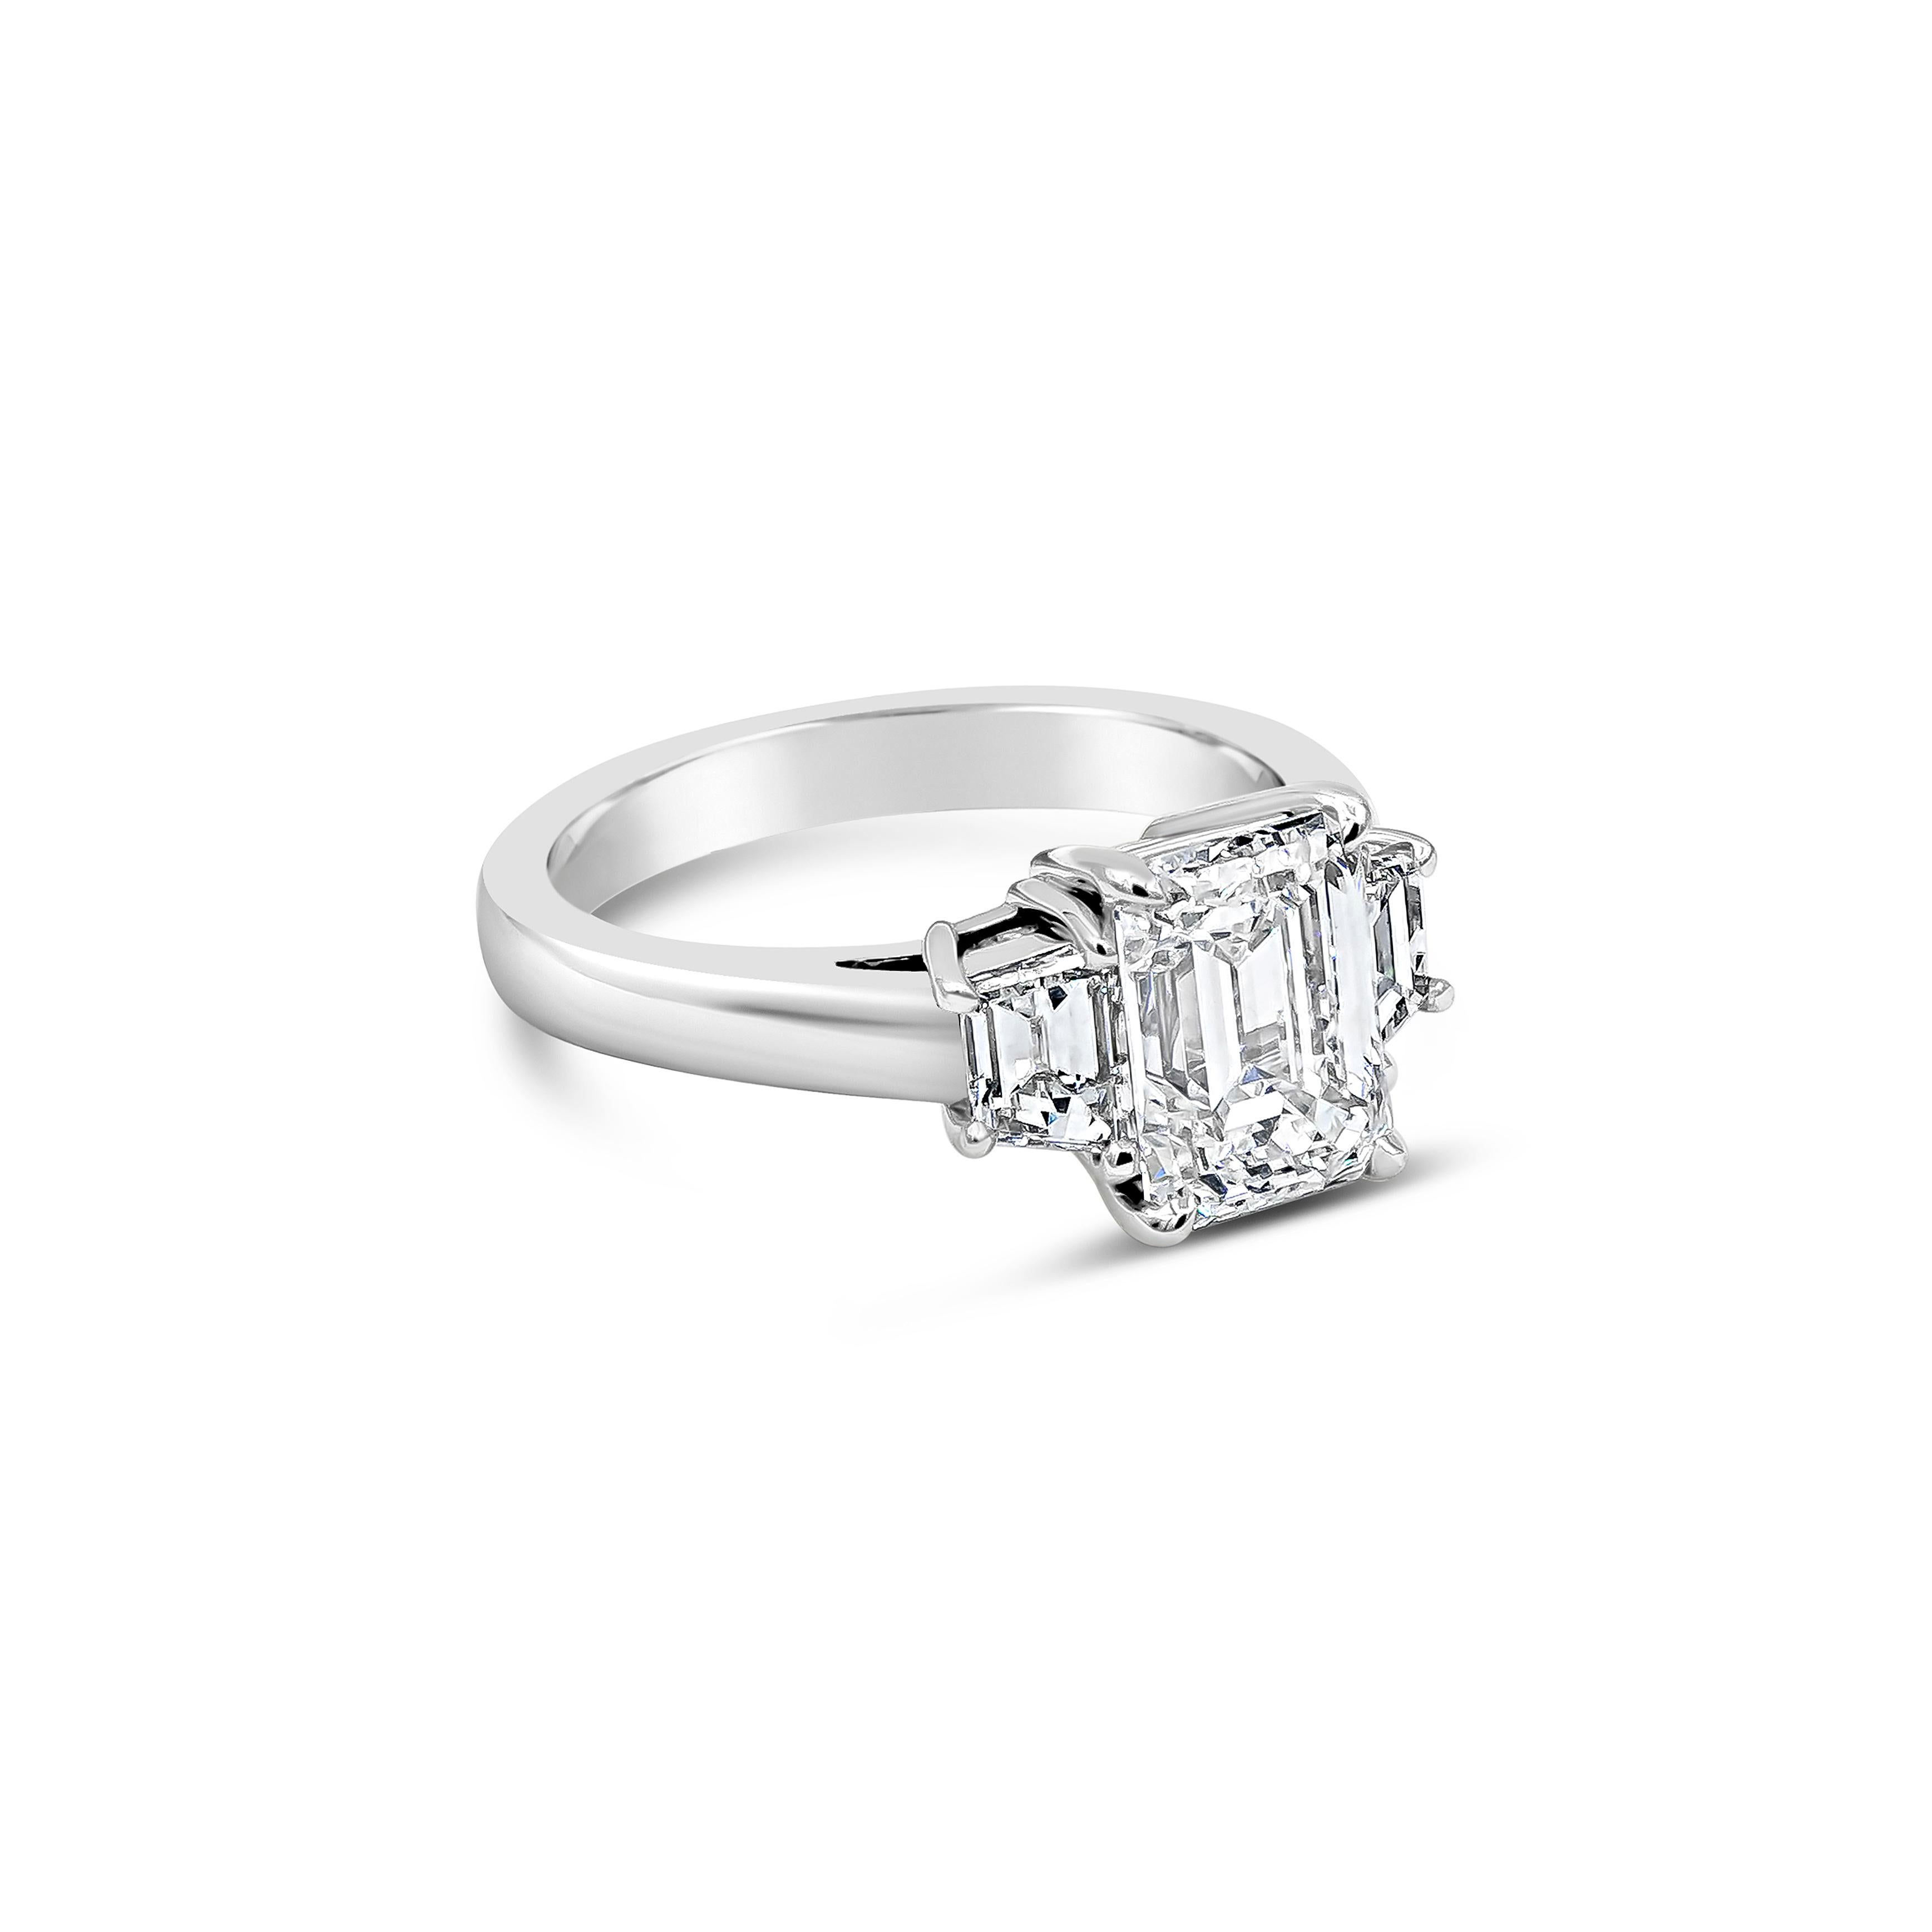 A simple and timeless engagement ring design showcasing a 2.12 carat emerald cut diamond certified by GIA as G color, VS2 clarity. Flanking the center are step-cut trapezoid diamonds weighing 0.69 carats total. Set in a platinum mounting.

Style